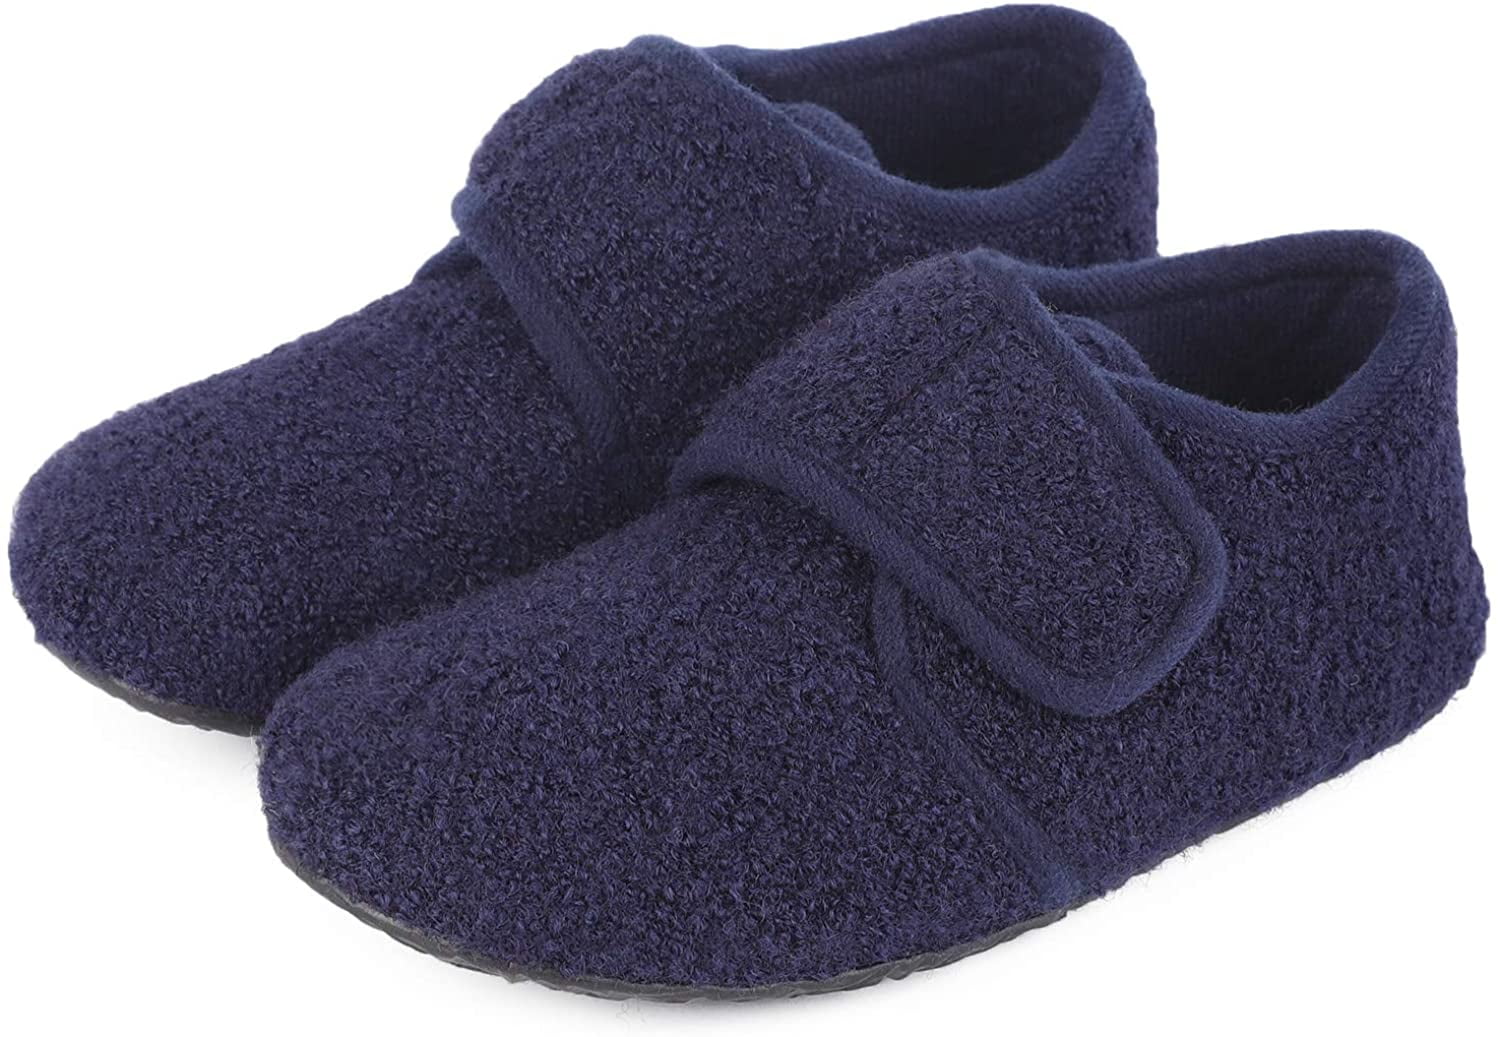 Comfort Boys Girls Wool Like House Slippers Kids Light Weight Anti-Skid Shoes with Adjustable Hook and Loop